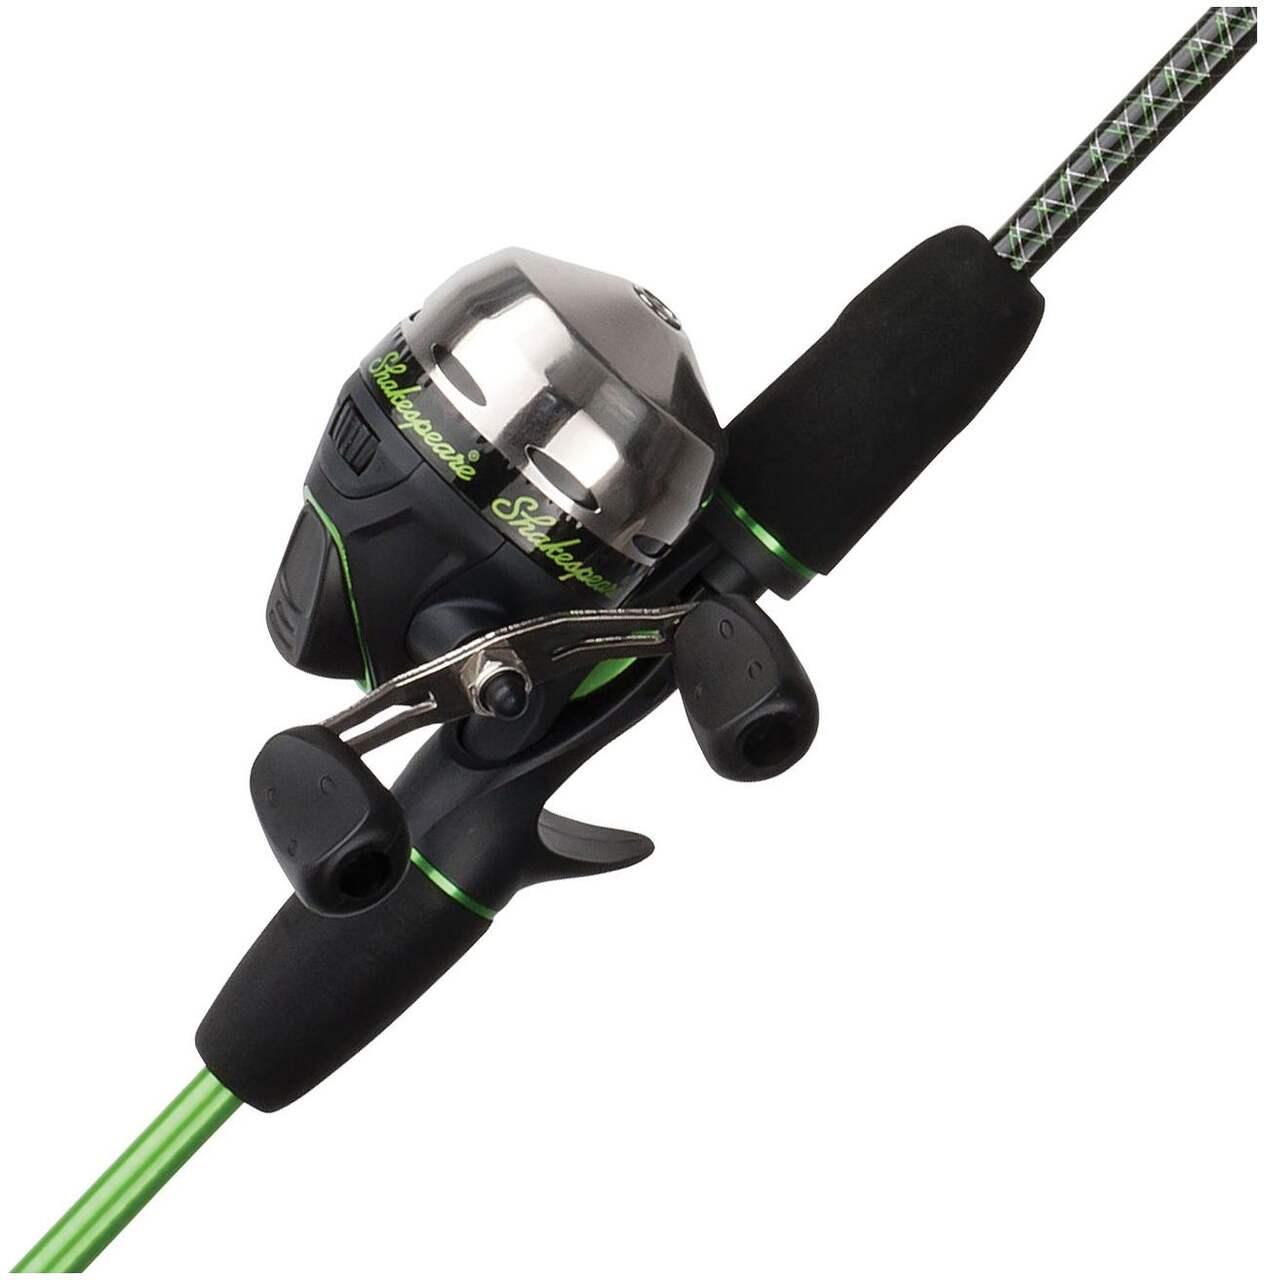 Ugly Stik Spinning Rod And Reel Combo for Sale in Balch Springs